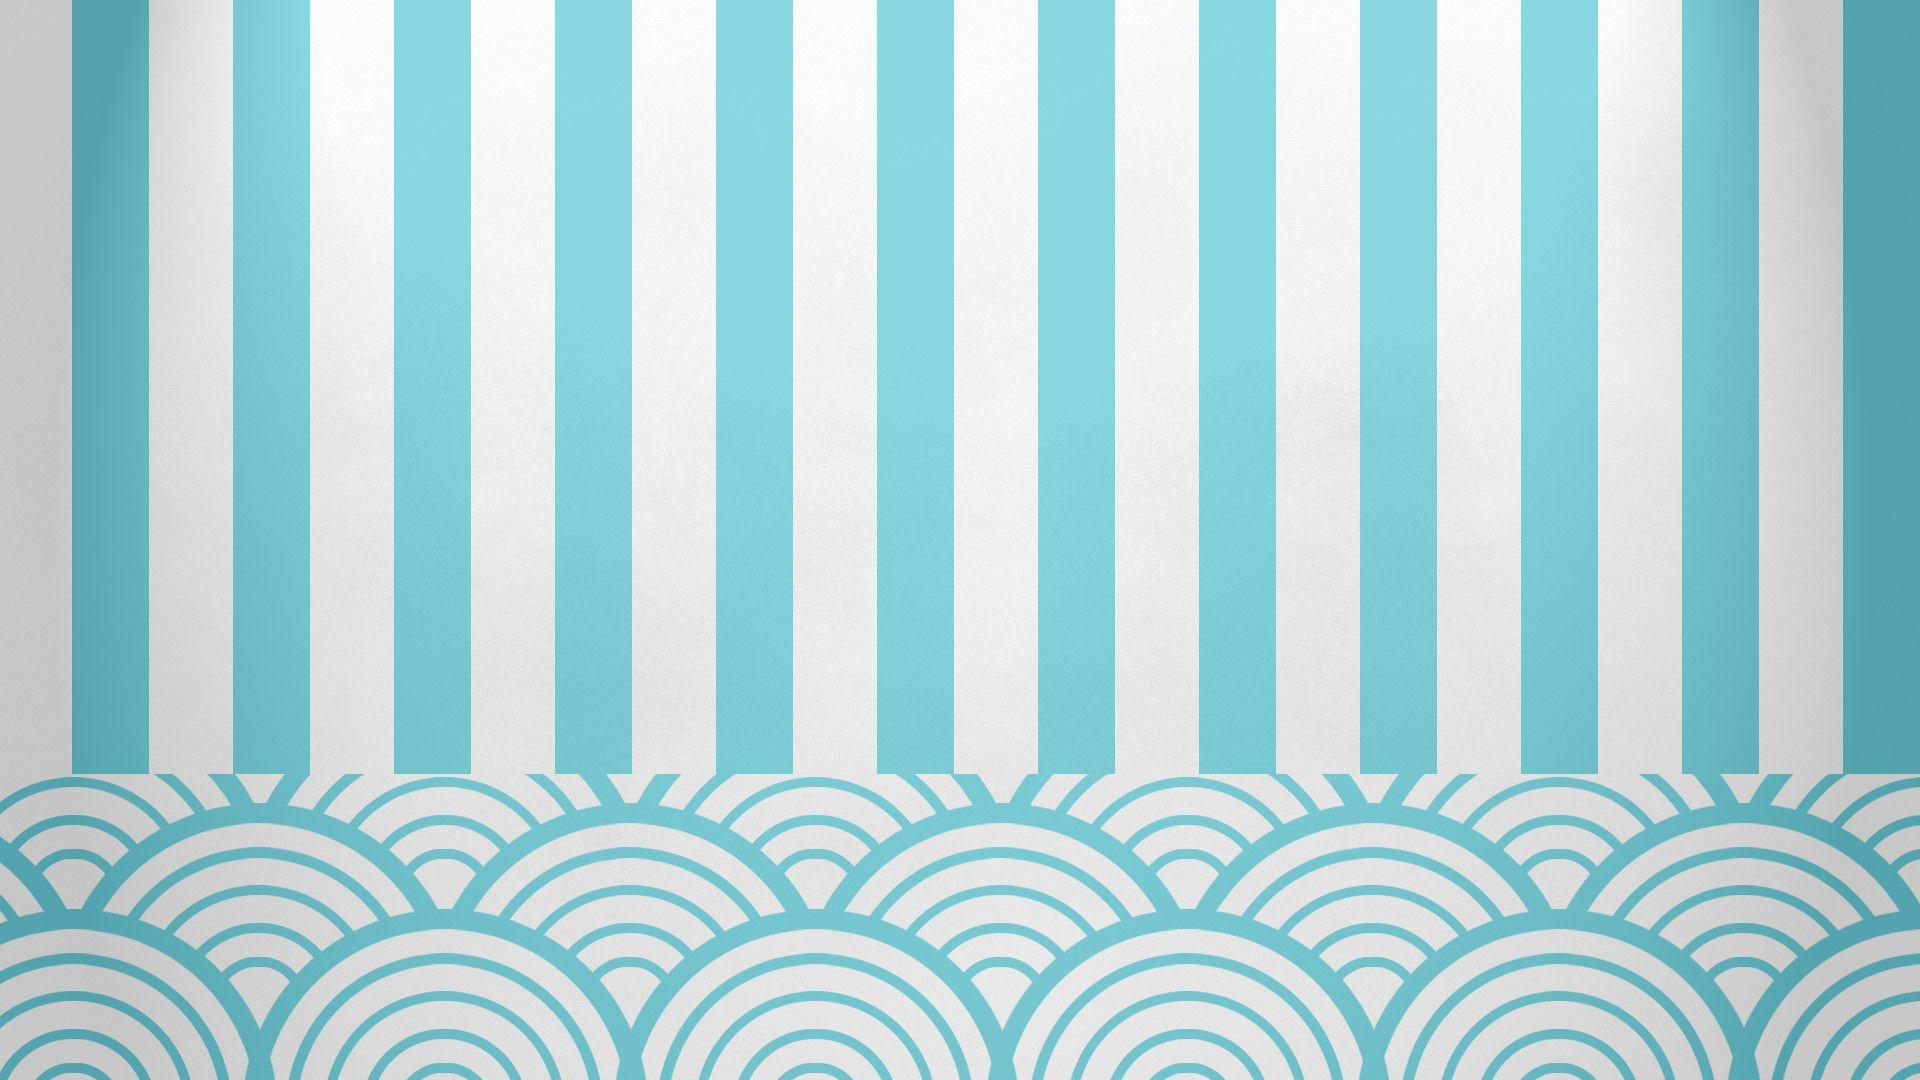 Backgrounds Tumblr Pattern - Wallpaper Cave